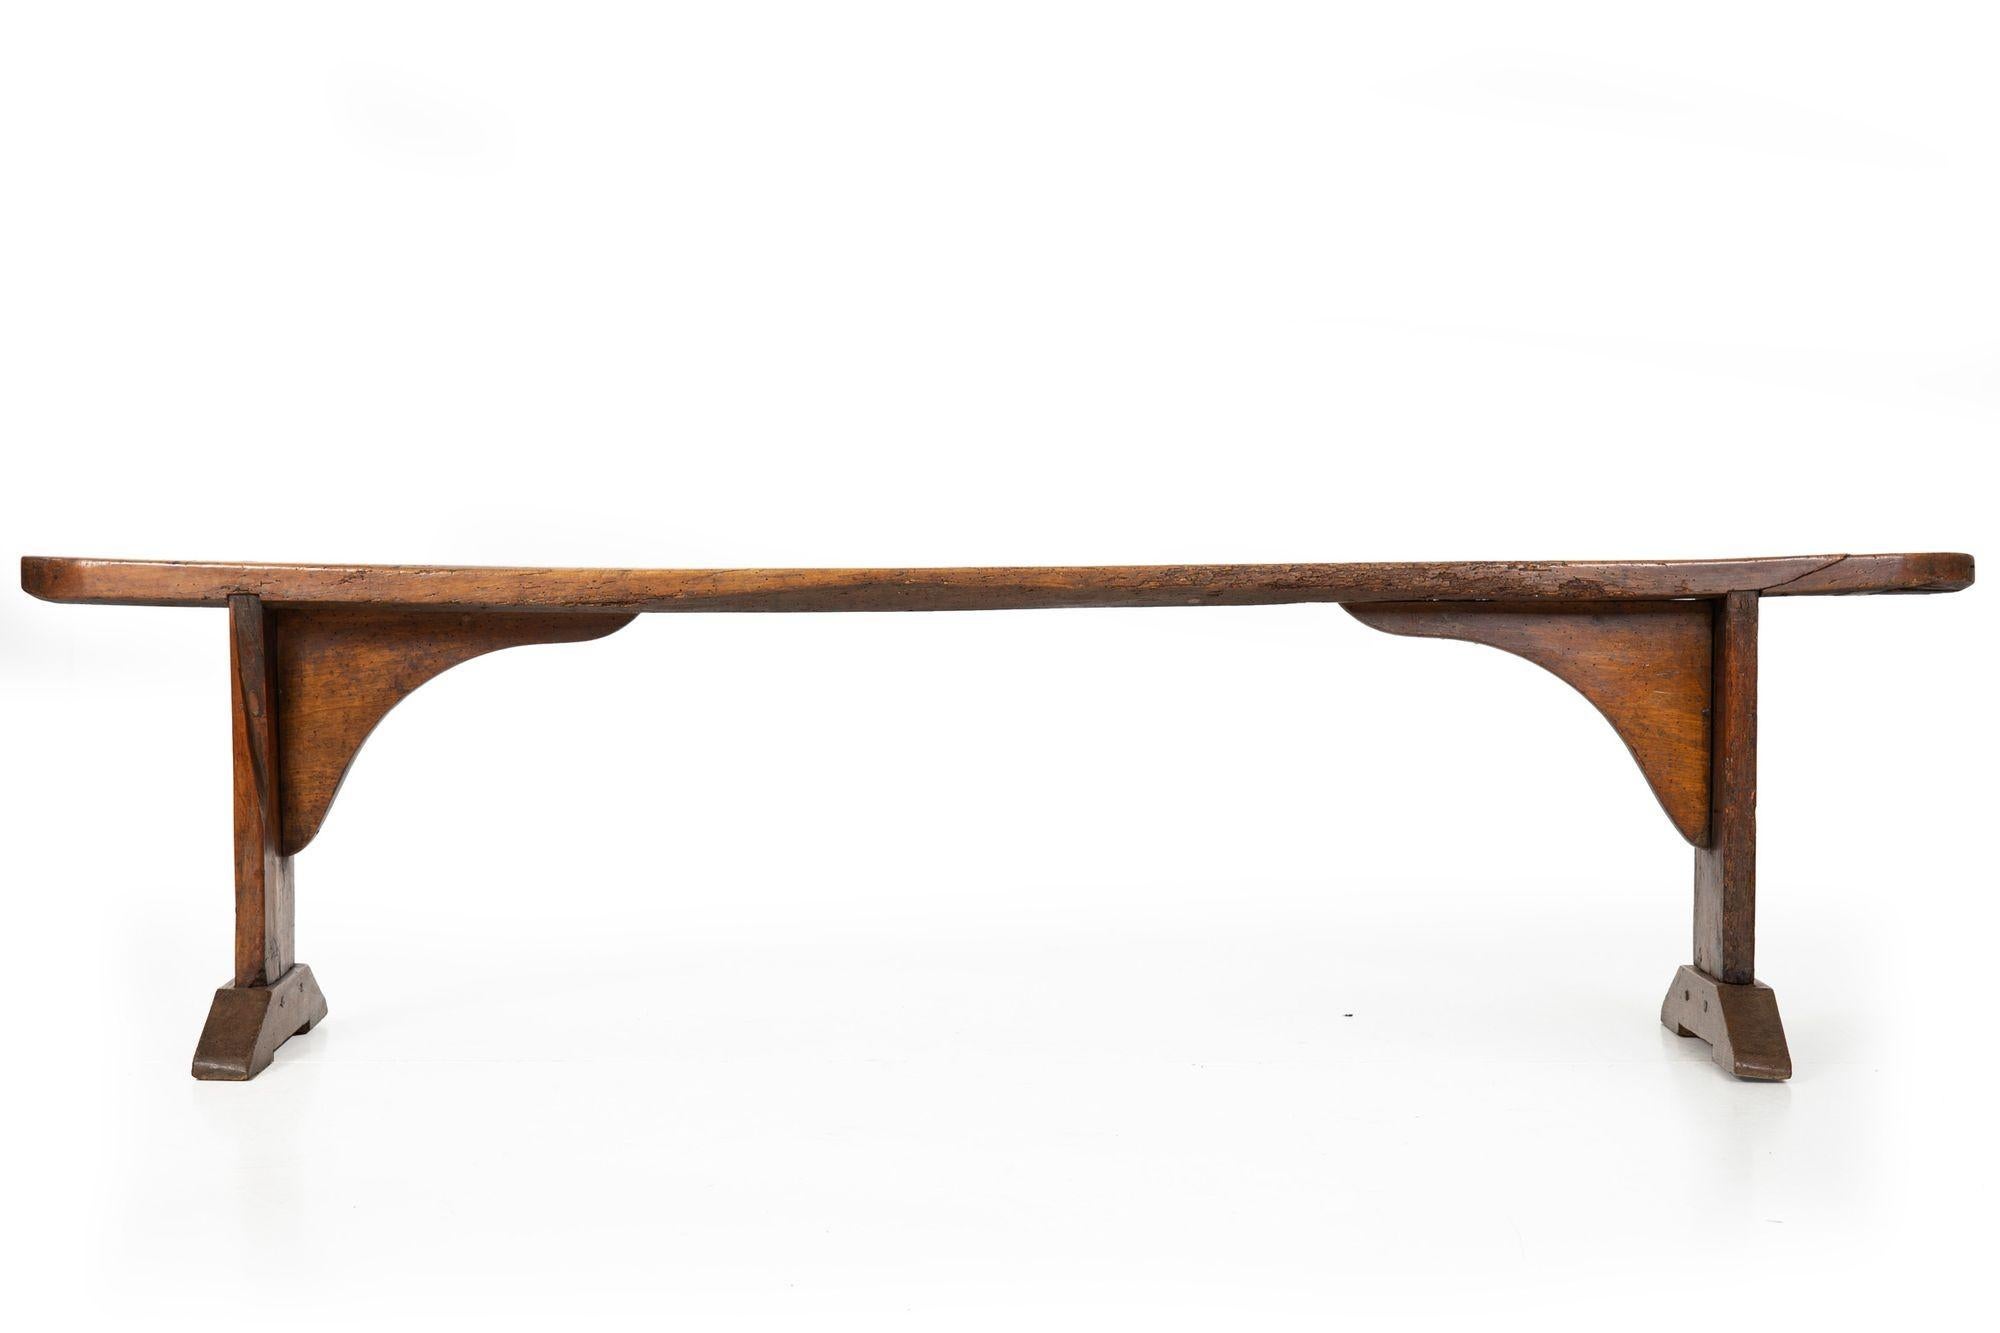 Georgian Mid-18th Century English Patinated Elm Long Trestle Bench For Sale